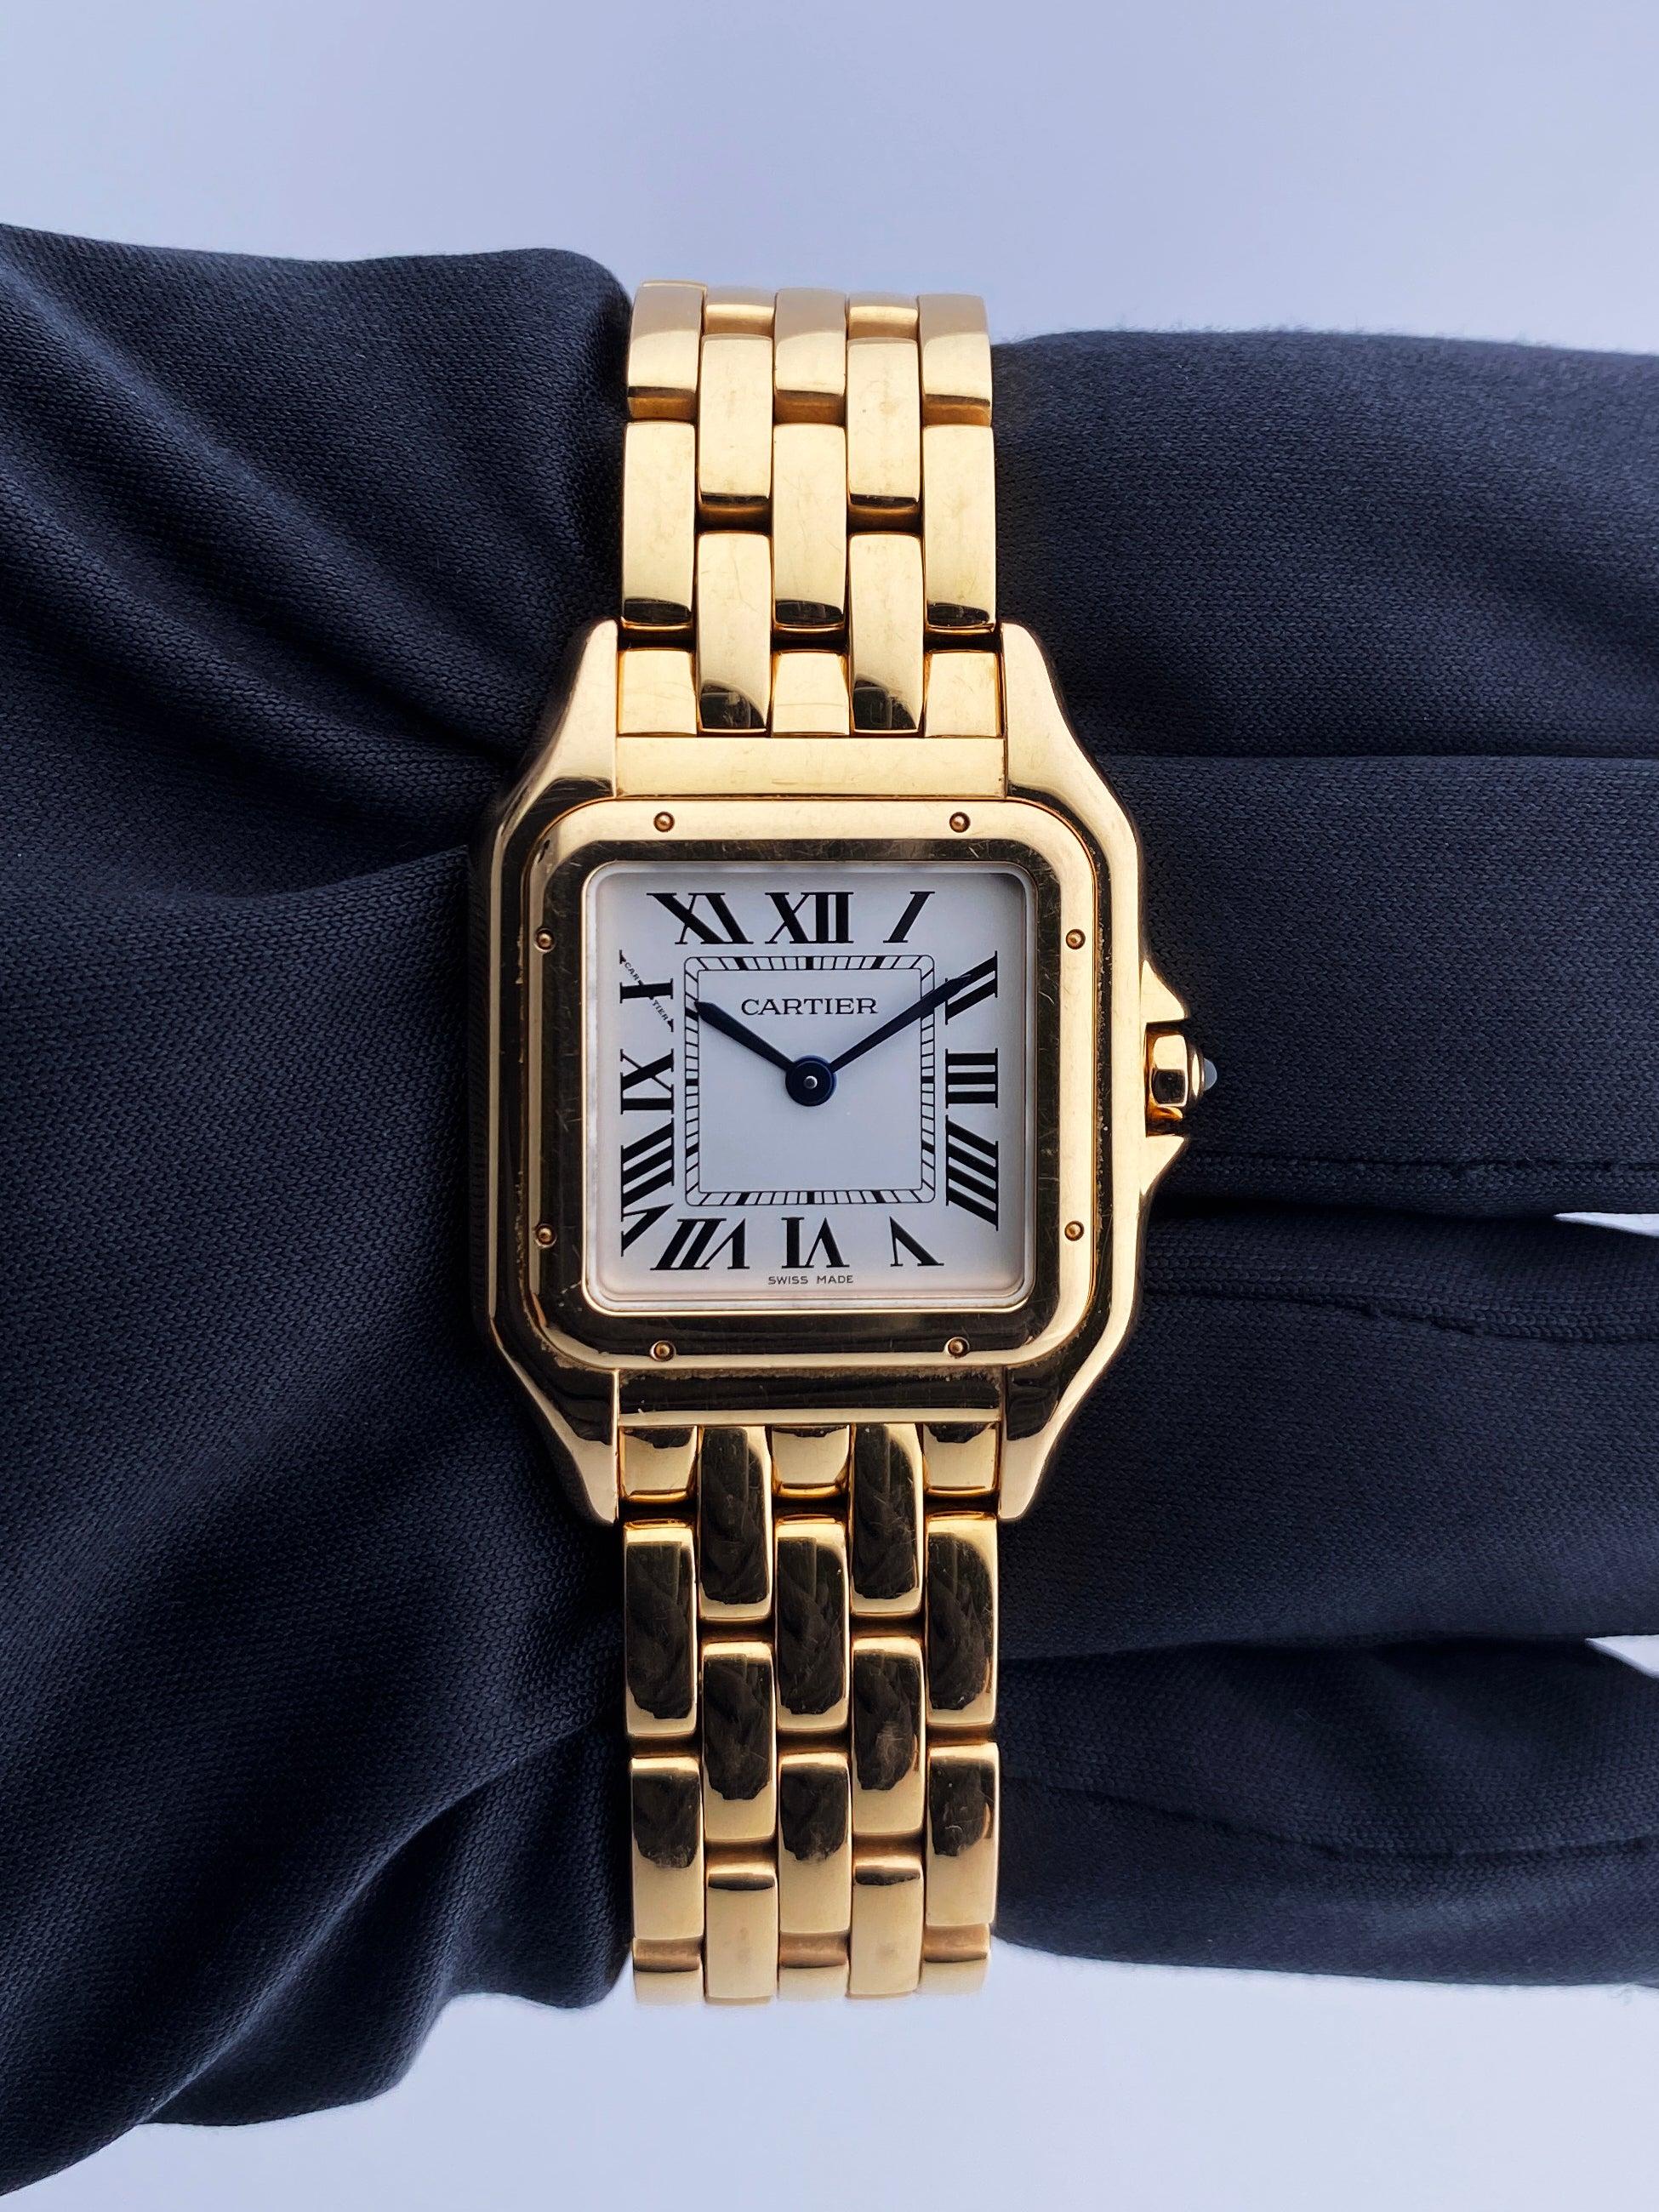 Cartier Panthere WGPN0007 Ladies Watch. 27mm 18K rose gold case. 18K rose gold  bezel. Silver dial with blue steel hands and black Roman numeral hour markers. Minute markers on the inner dial. 18k rose gold bracelet with hidden butterfly clasp. Will